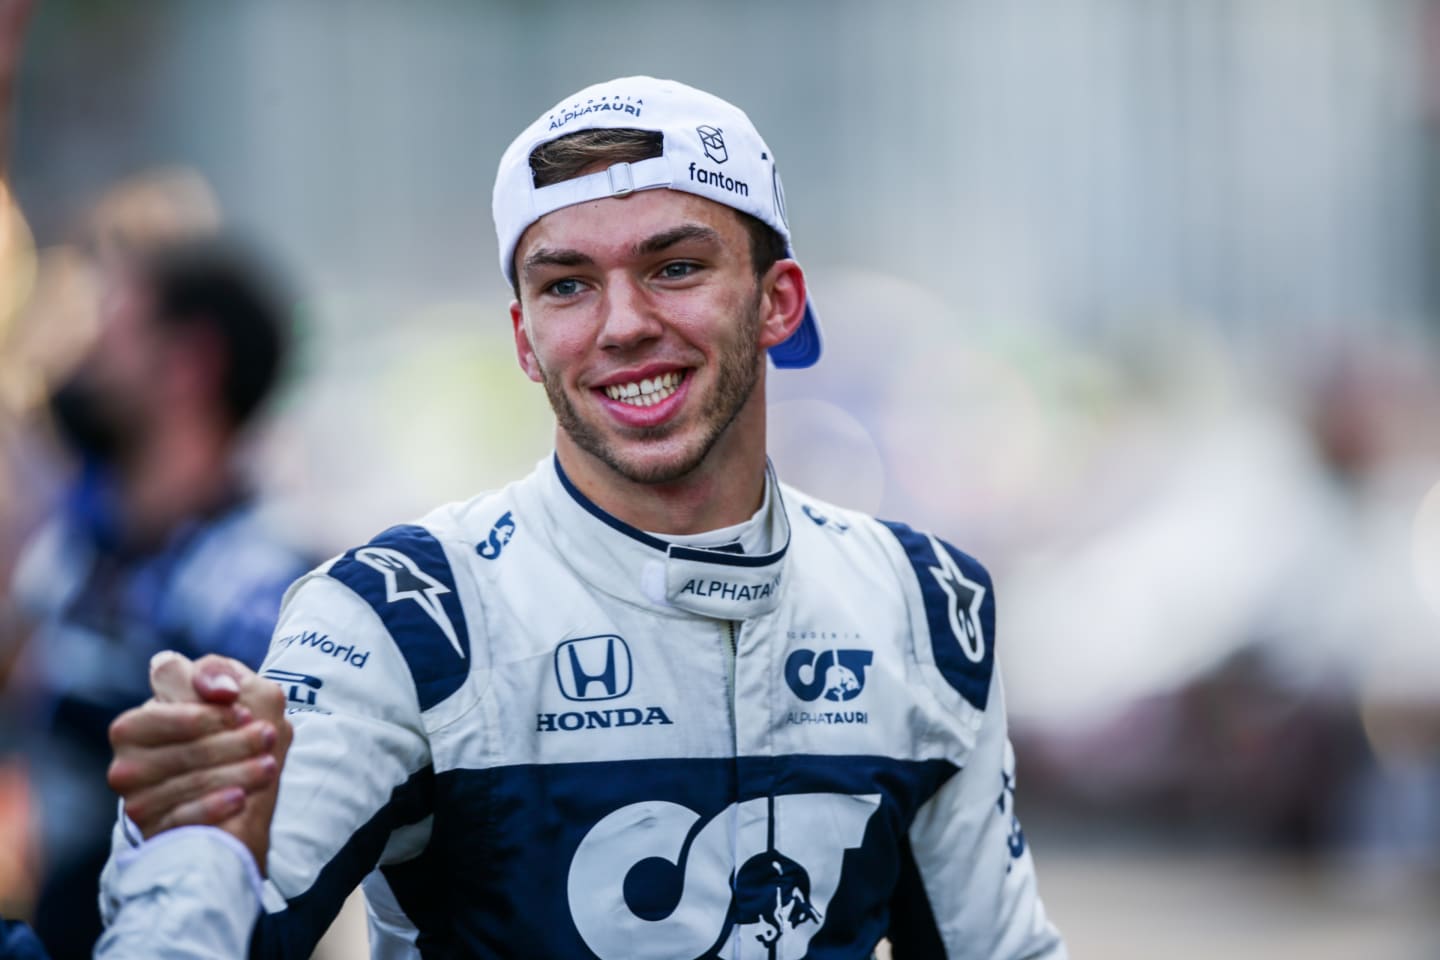 BAKU, AZERBAIJAN - JUNE 06: Pierre Gasly of Scuderia AlphaTauri and France  during the F1 Grand Prix of Azerbaijan at Baku City Circuit on June 06, 2021 in Baku, Azerbaijan. (Photo by Peter Fox/Getty Images)